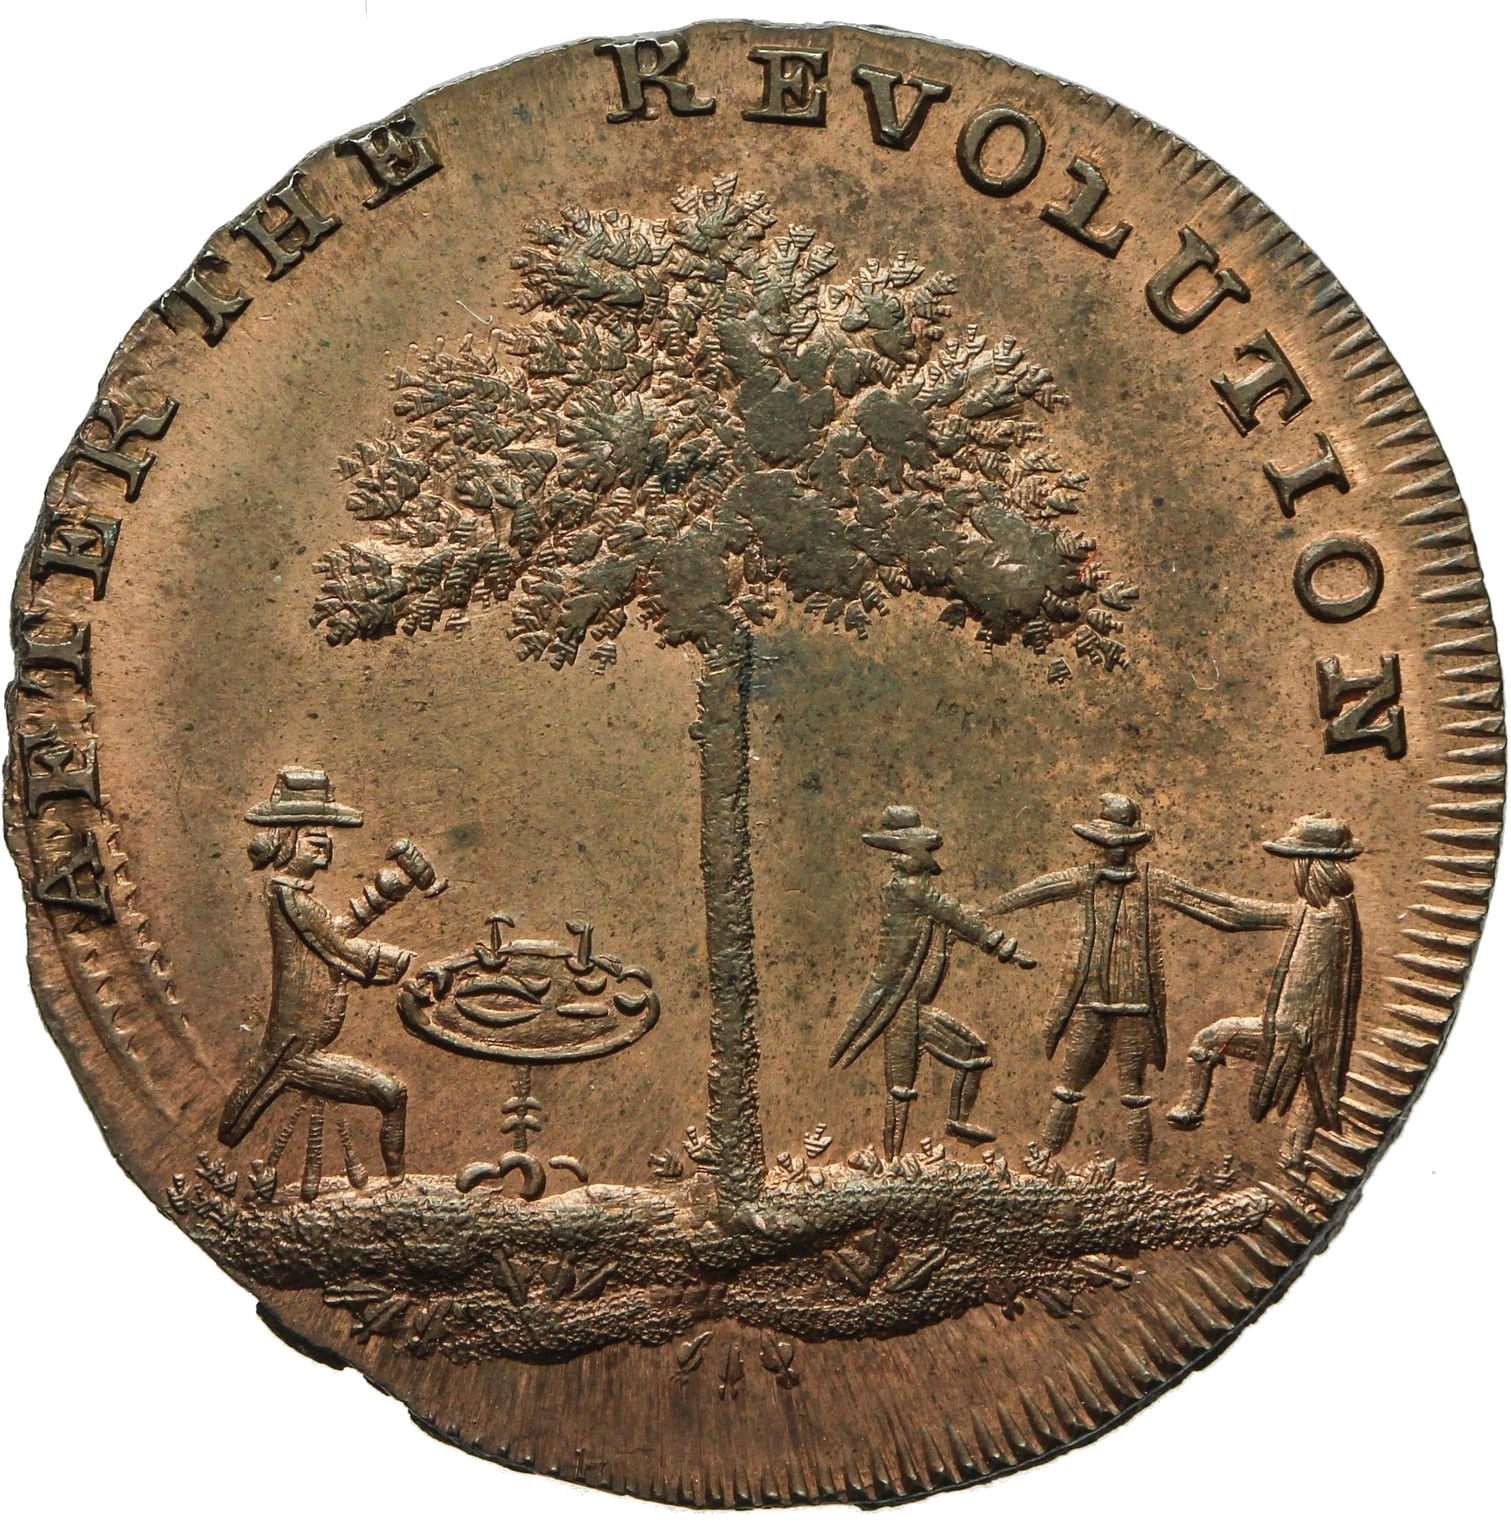 Spence's token 'After the Revolution'